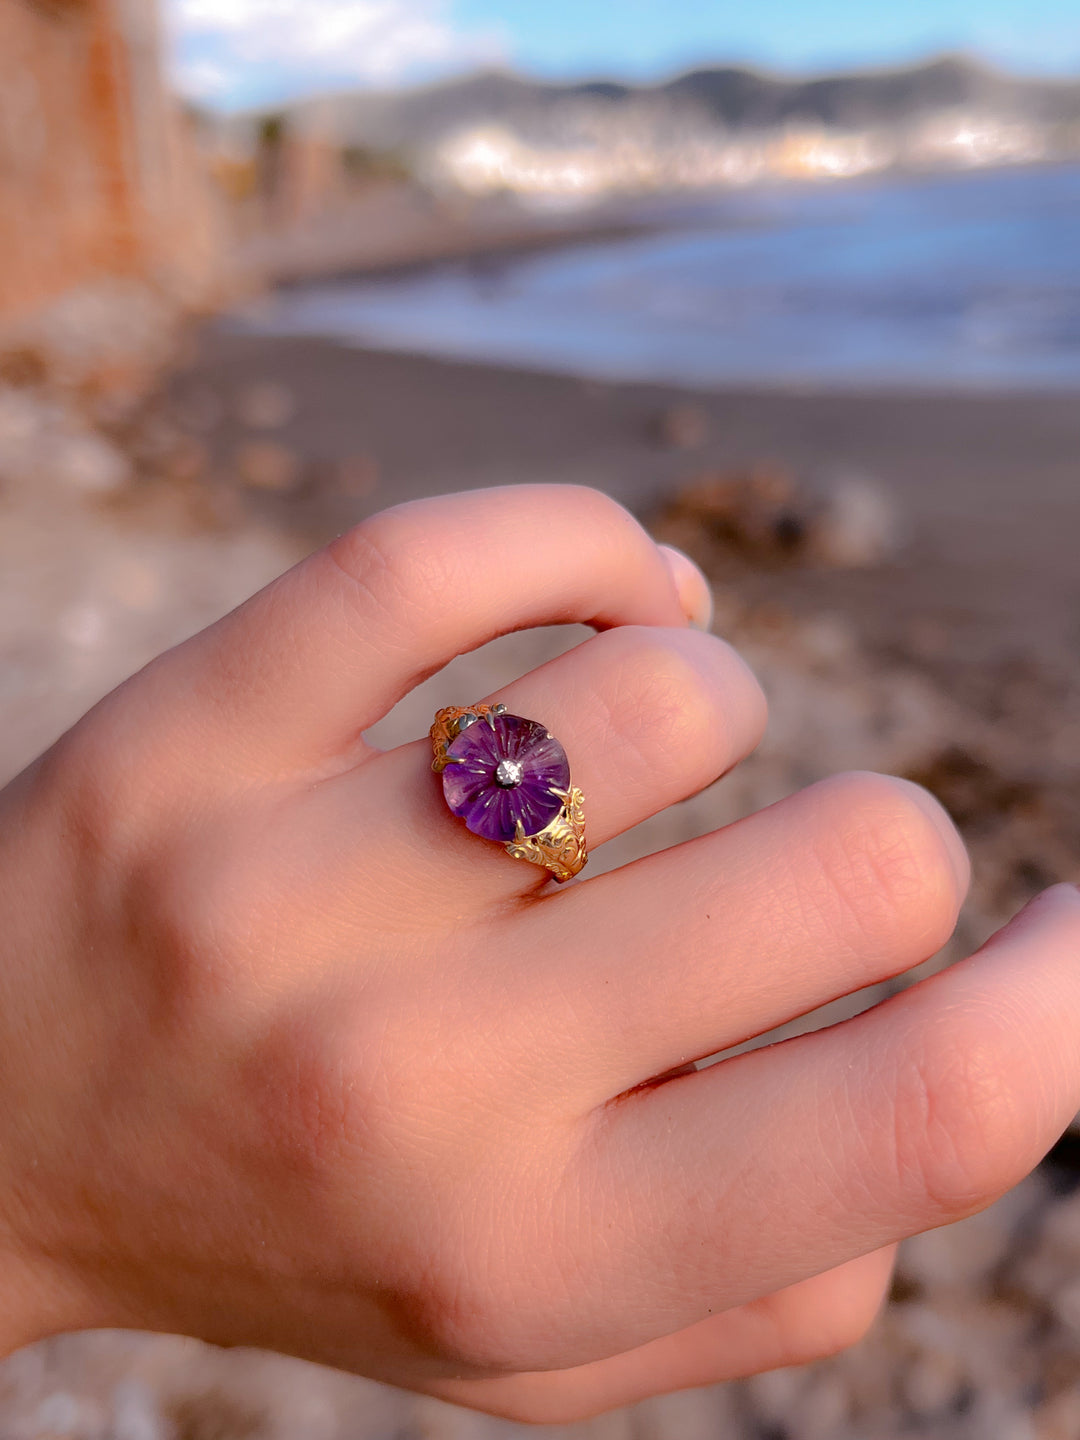 Exceptional Late 19th C Carved Amethyst Flower Conversion Ring